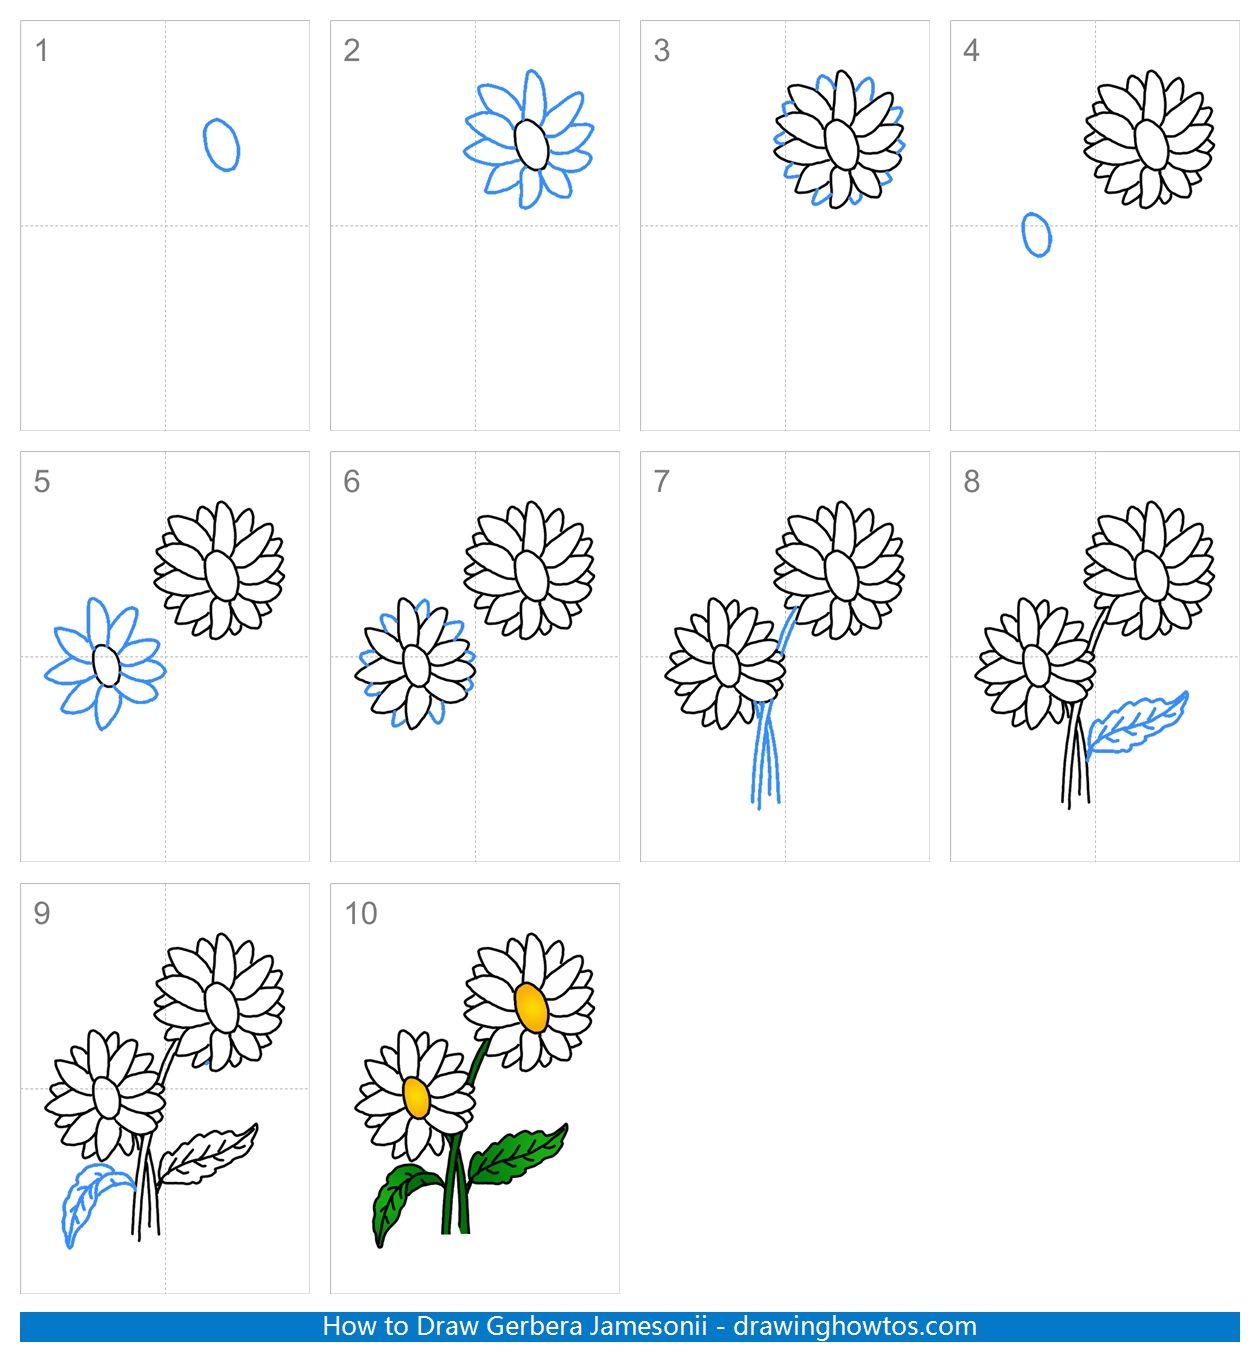 How to Draw Gerbera Daisy Flowers Step by Step